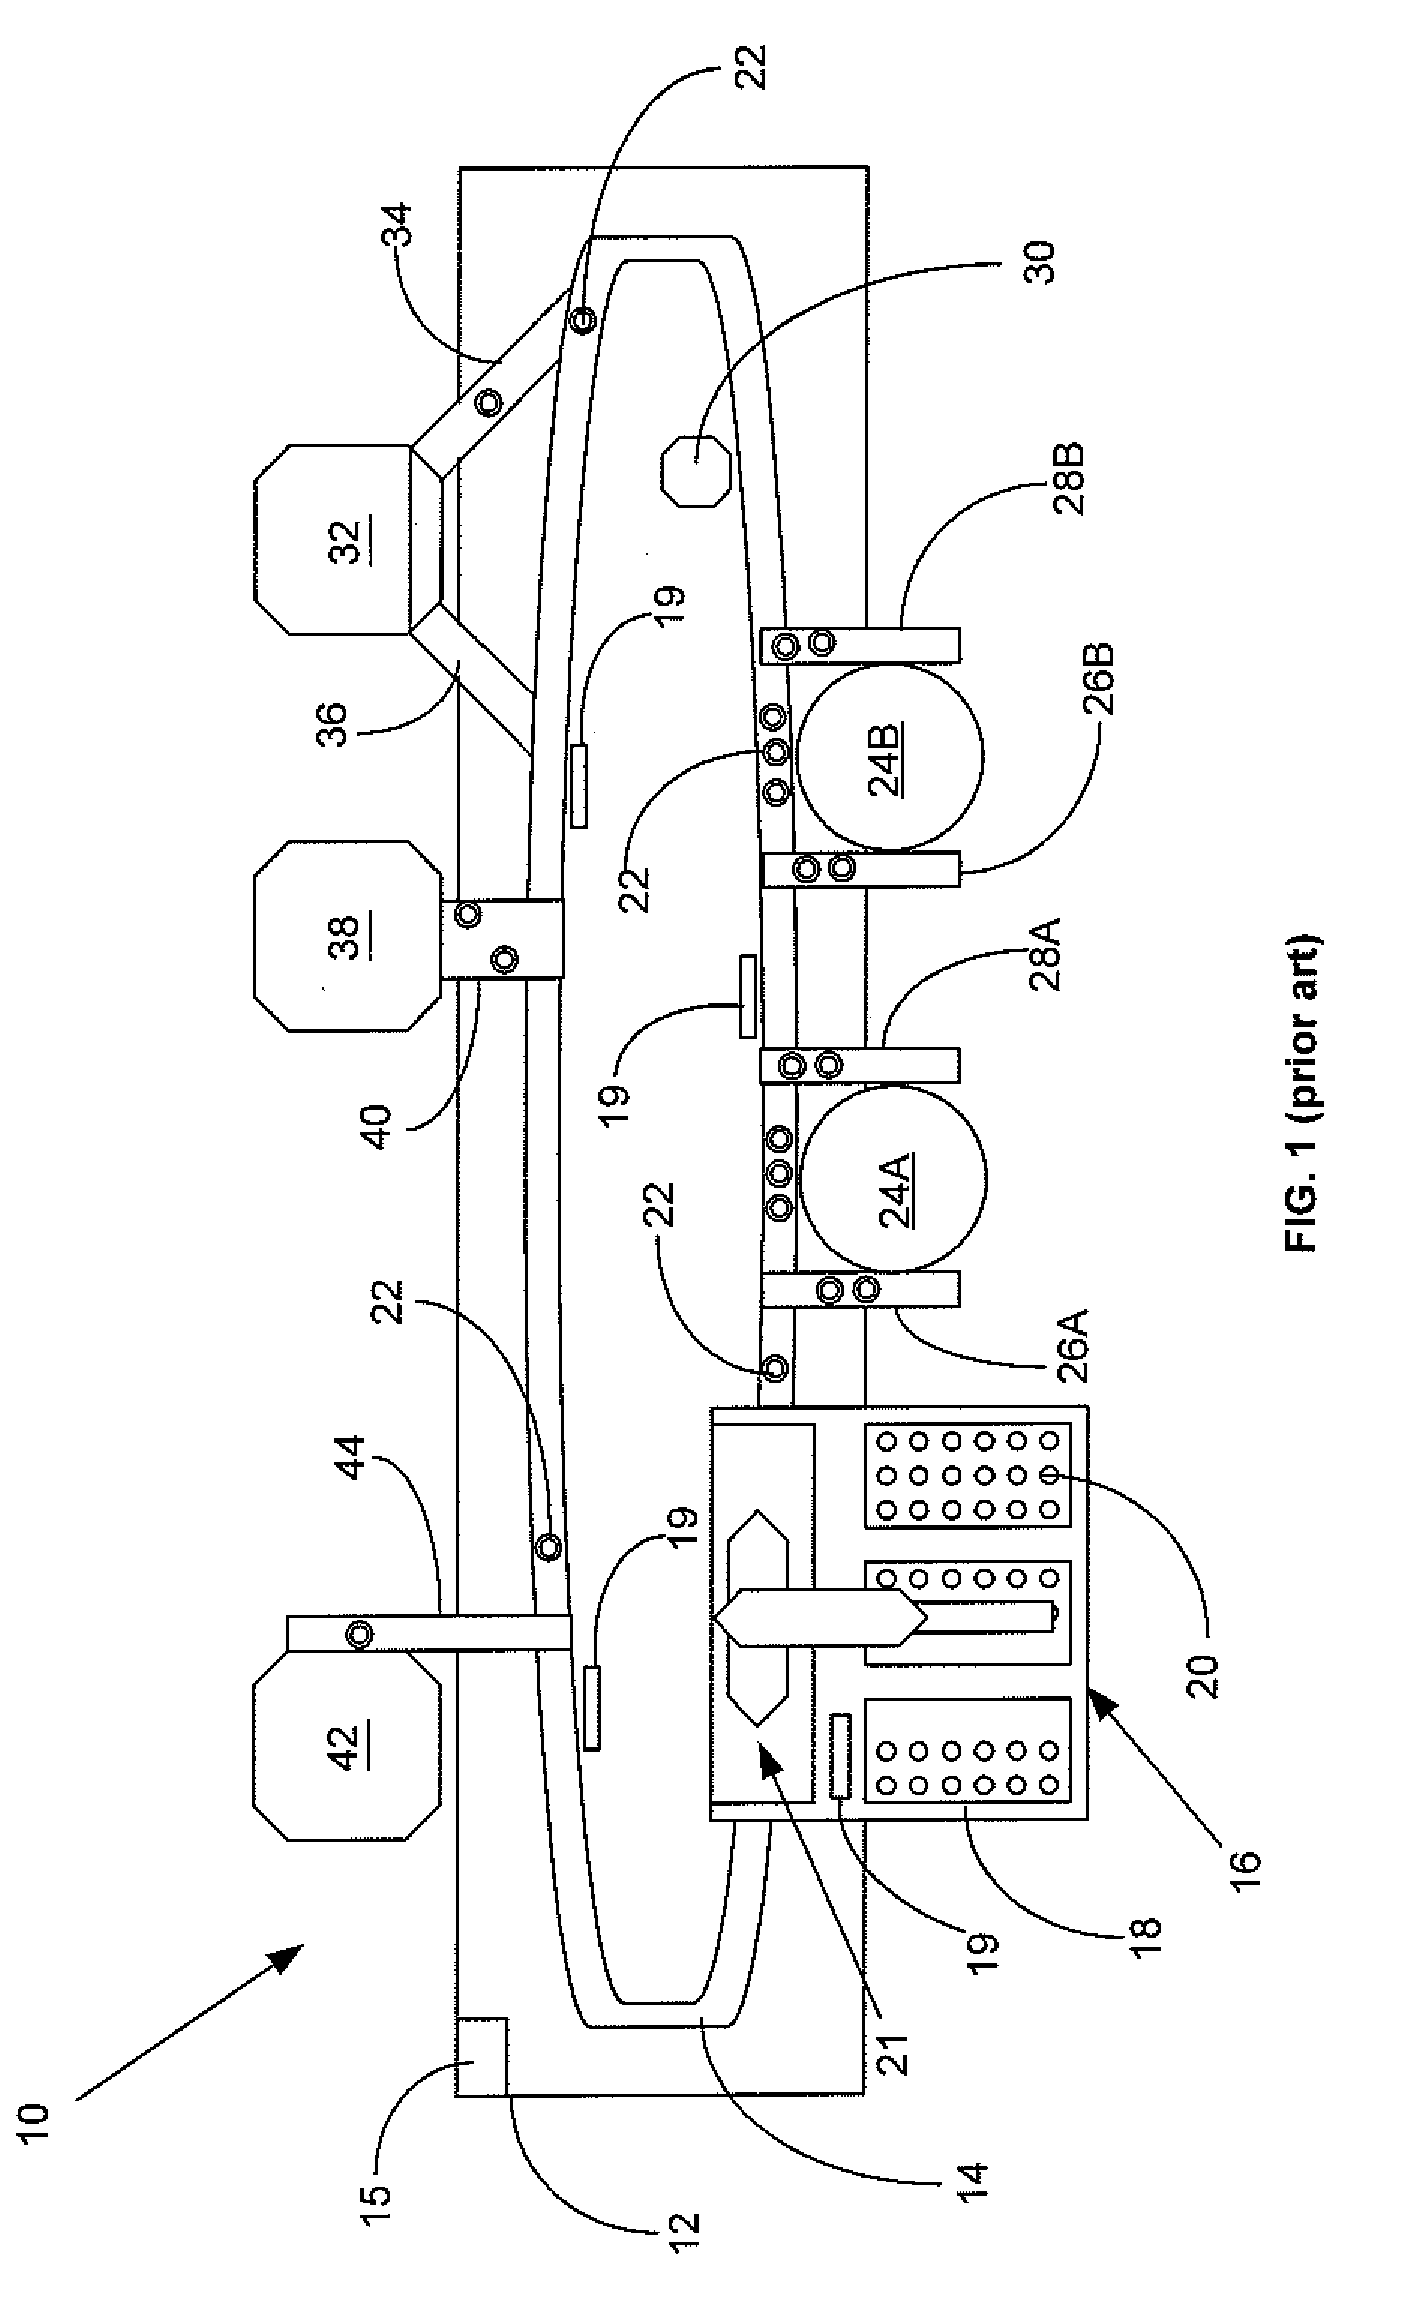 Centrifuge Loading Process Within An Automated Laboratory System